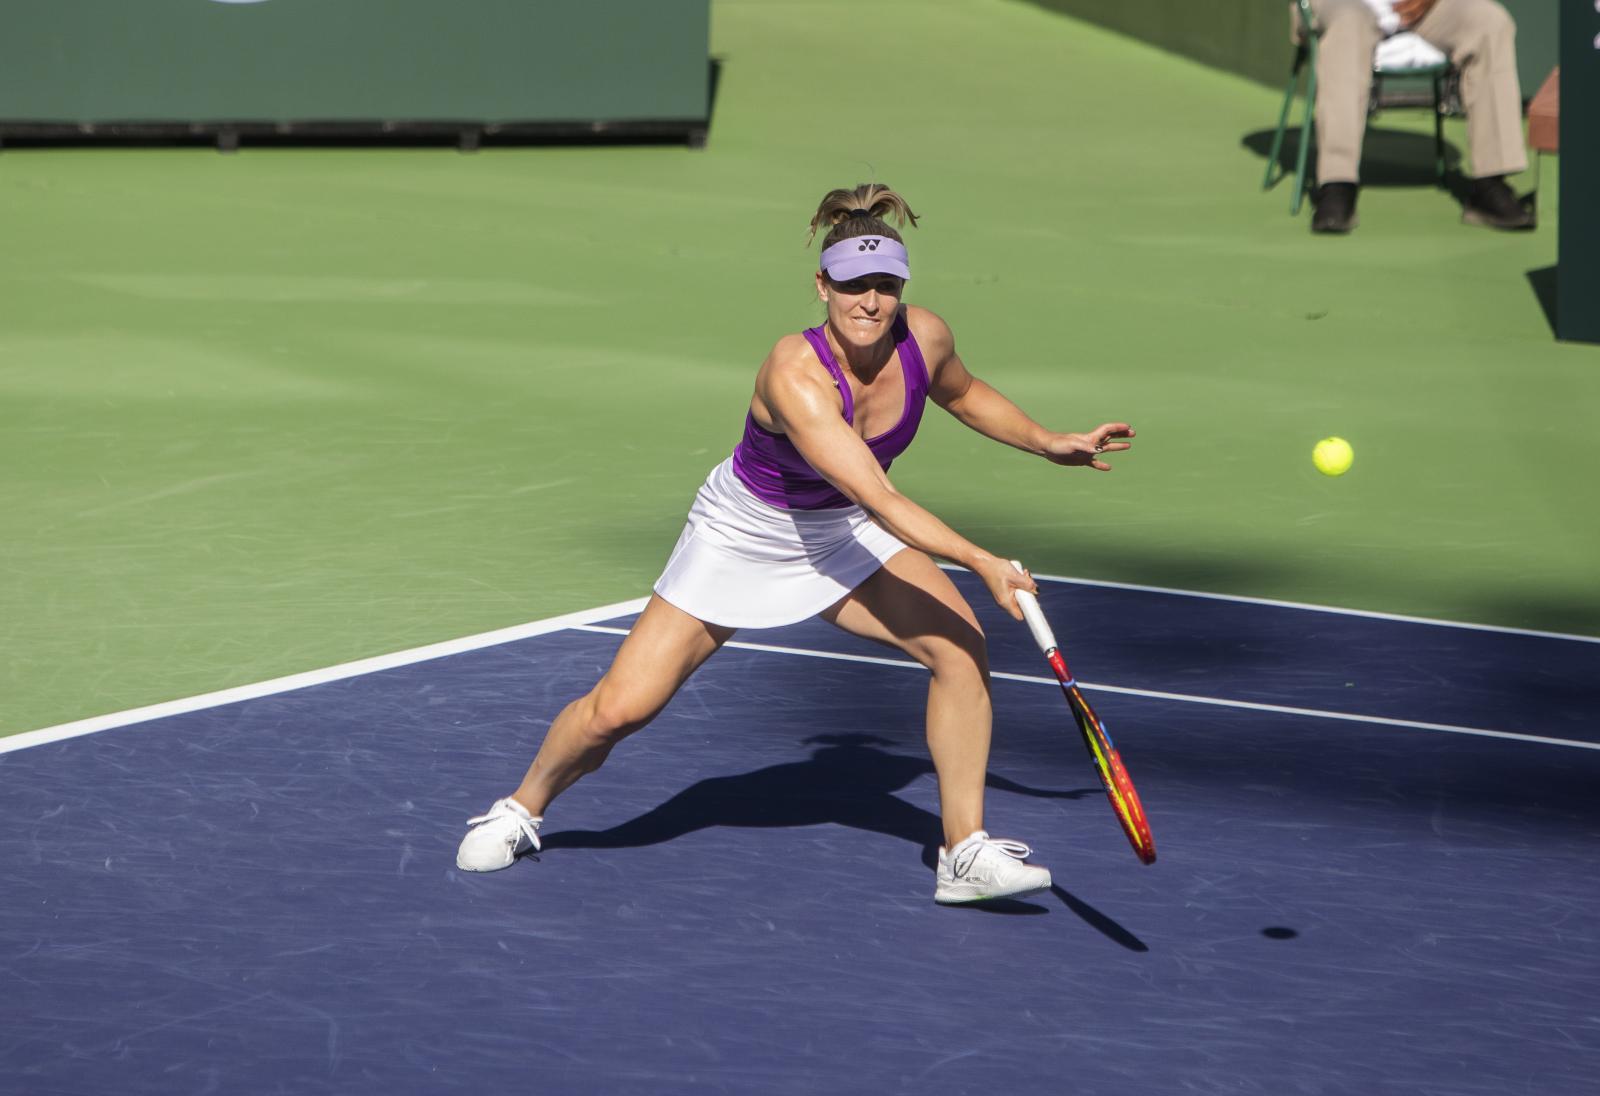 Dabrowski Competes at BNP Paribas Open | Buy this image